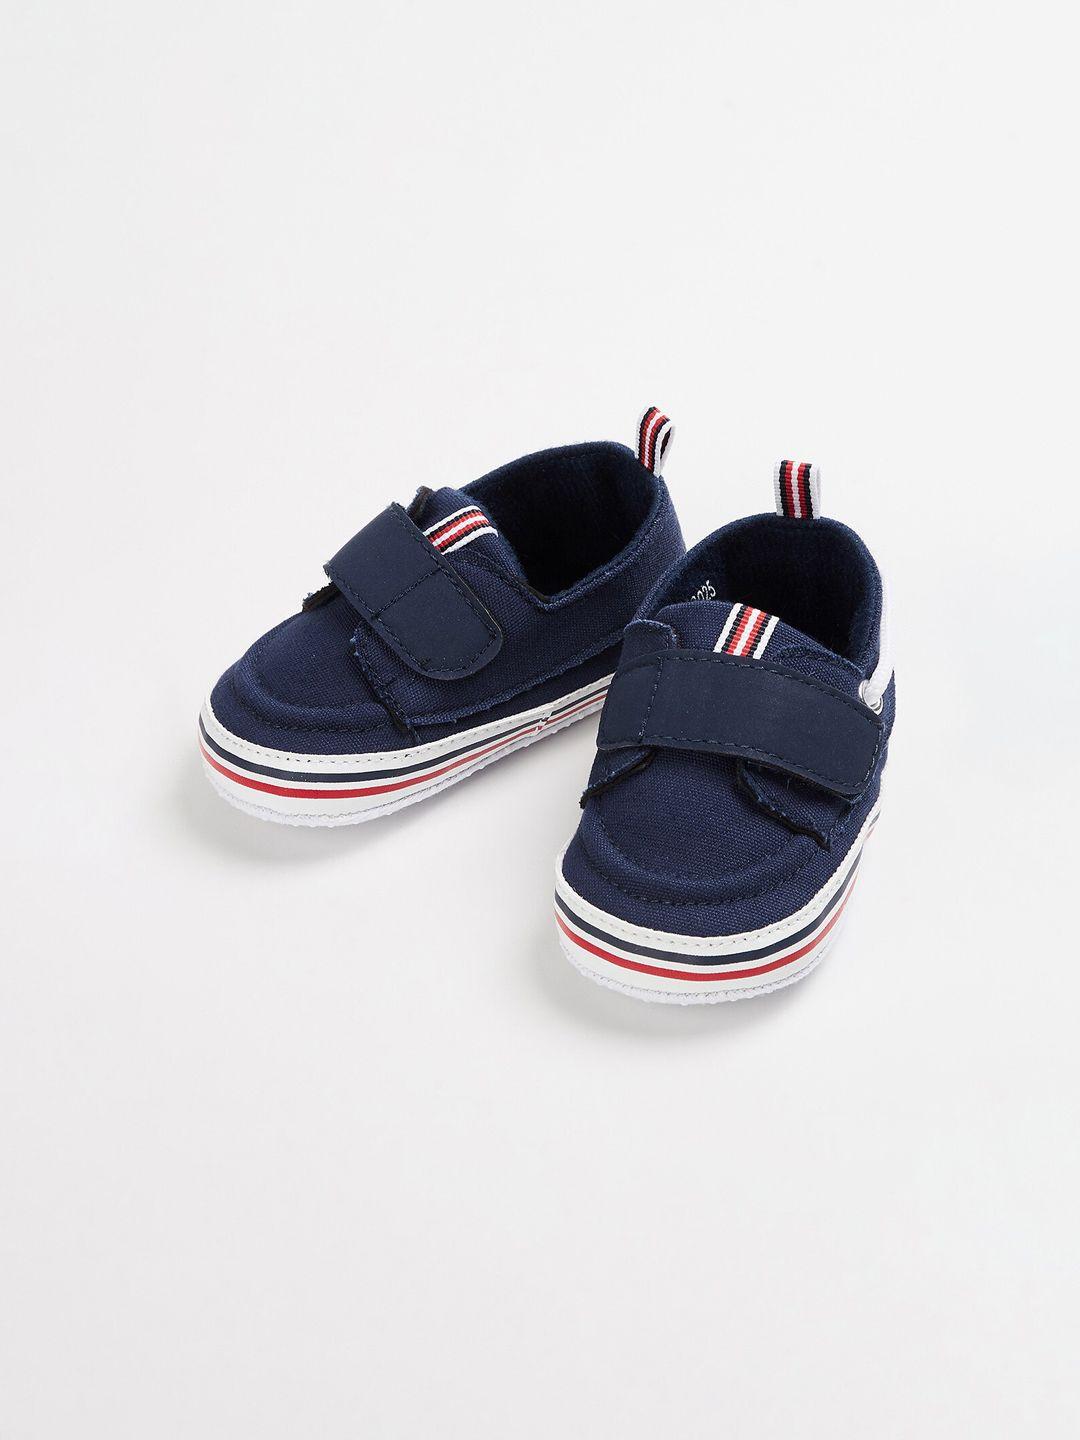 fame-forever-by-lifestyle-boys-navy-blue-boat-shoes